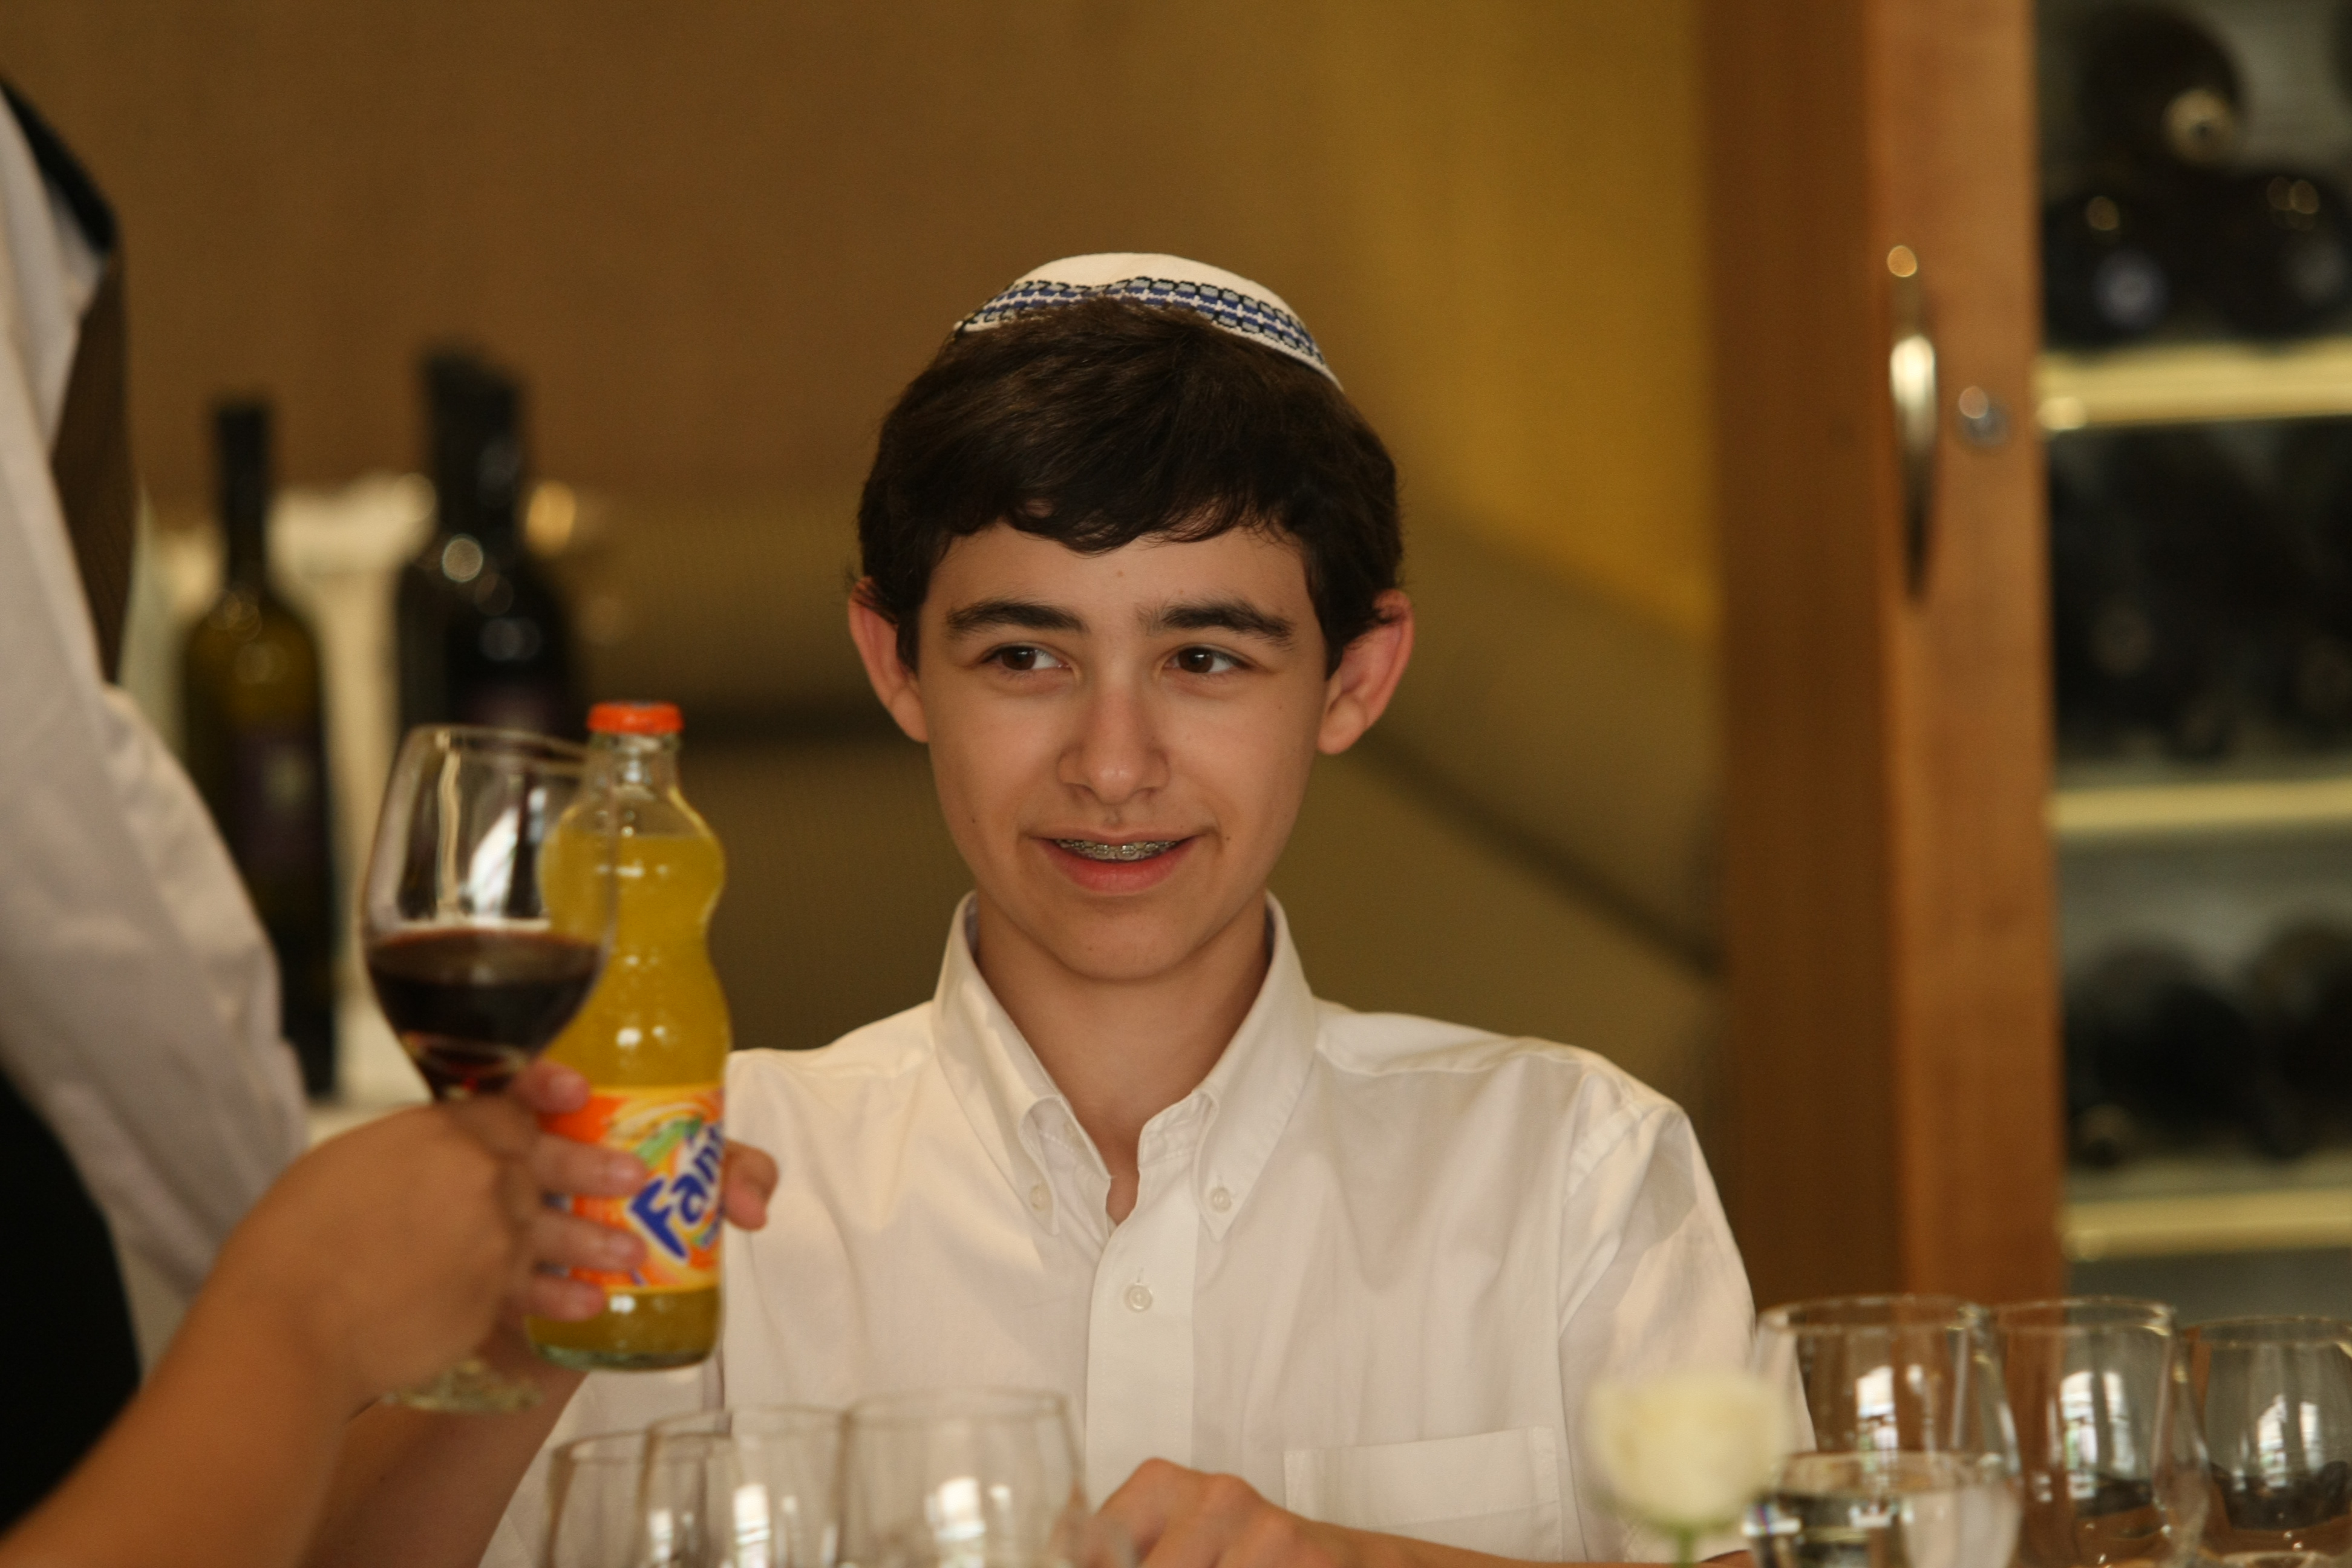 Click to return to grid view of the "Private Galleries" gallery "Sam’s Bar Mitzvah"